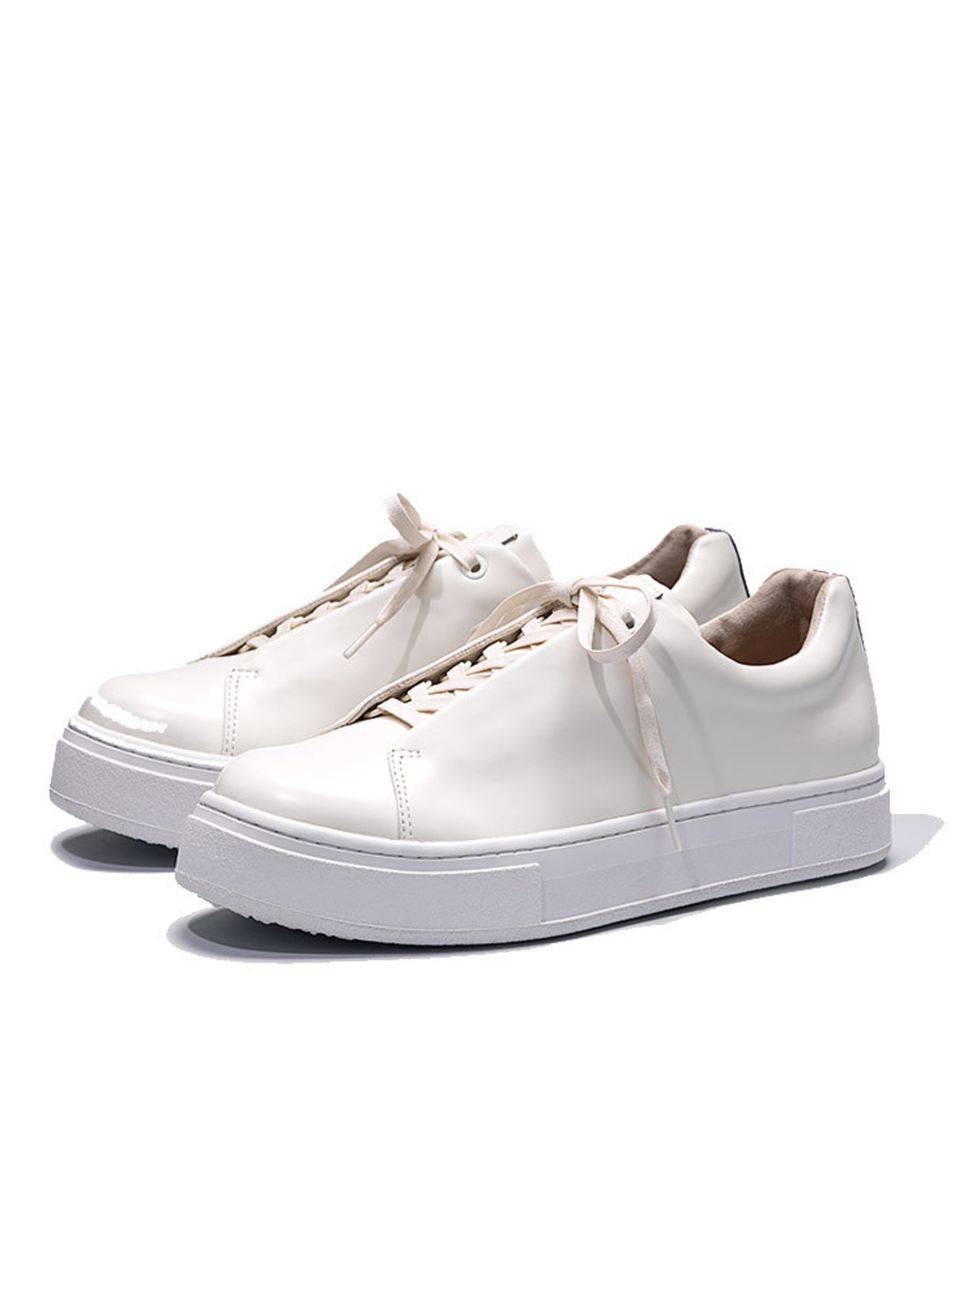 <p>Eytys make shoes with super cool designs, ovbiously Swedish. What's not to love?</p>

<p><a href="http://www.eytys.com/" target="_blank">Eytys</a> Doja Leather shoes, £140</p>